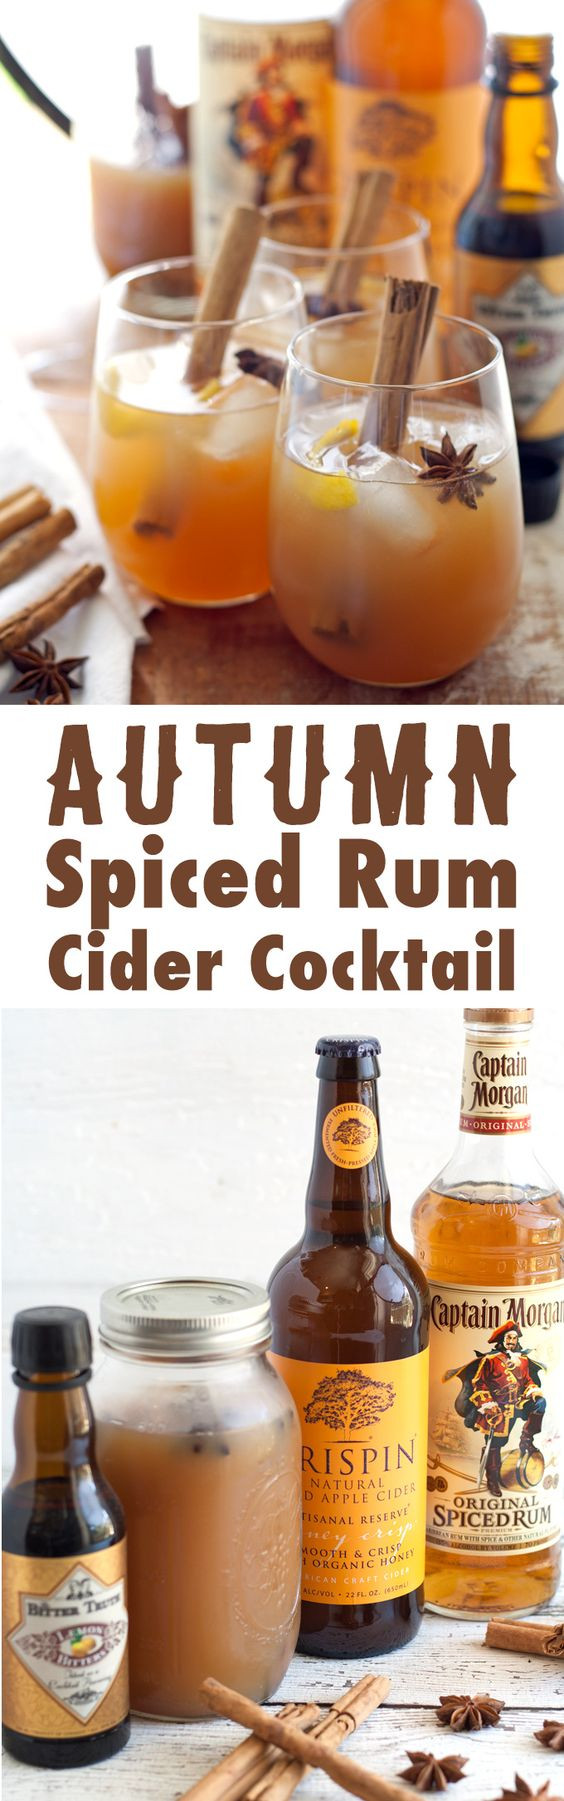 Rum Drinks For Fall
 31 Fall Inspired Drink Recipes